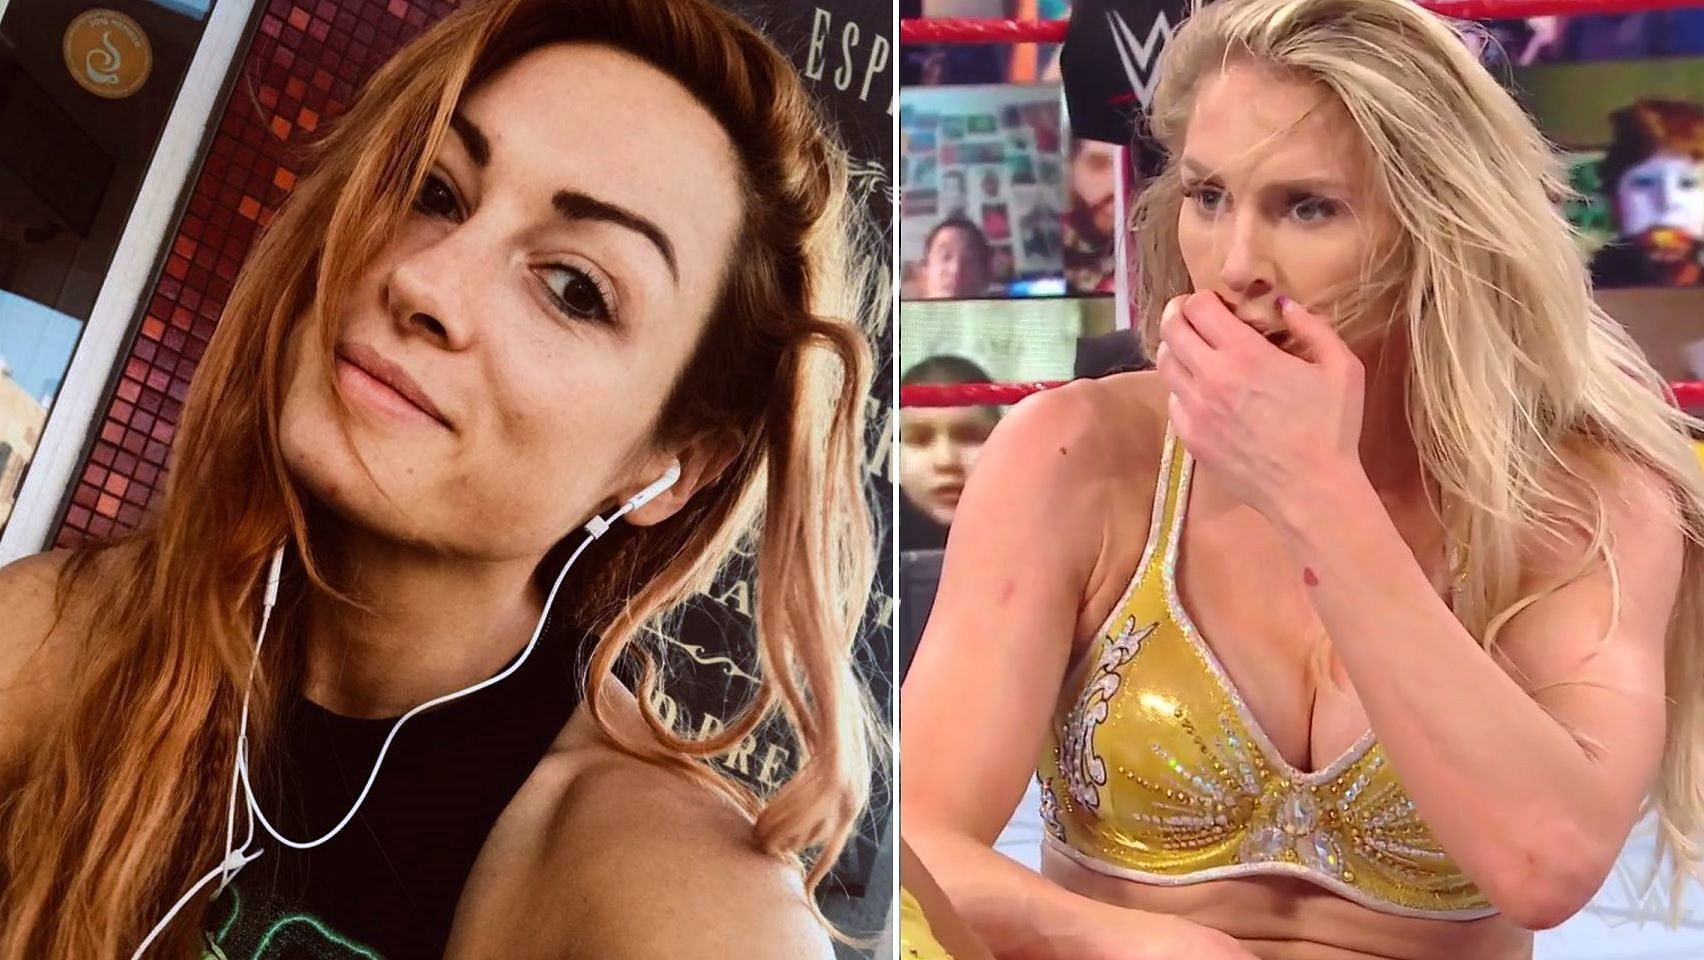 Becky Lynch and Charlotte Flair are two of the biggest stars on WWE TV